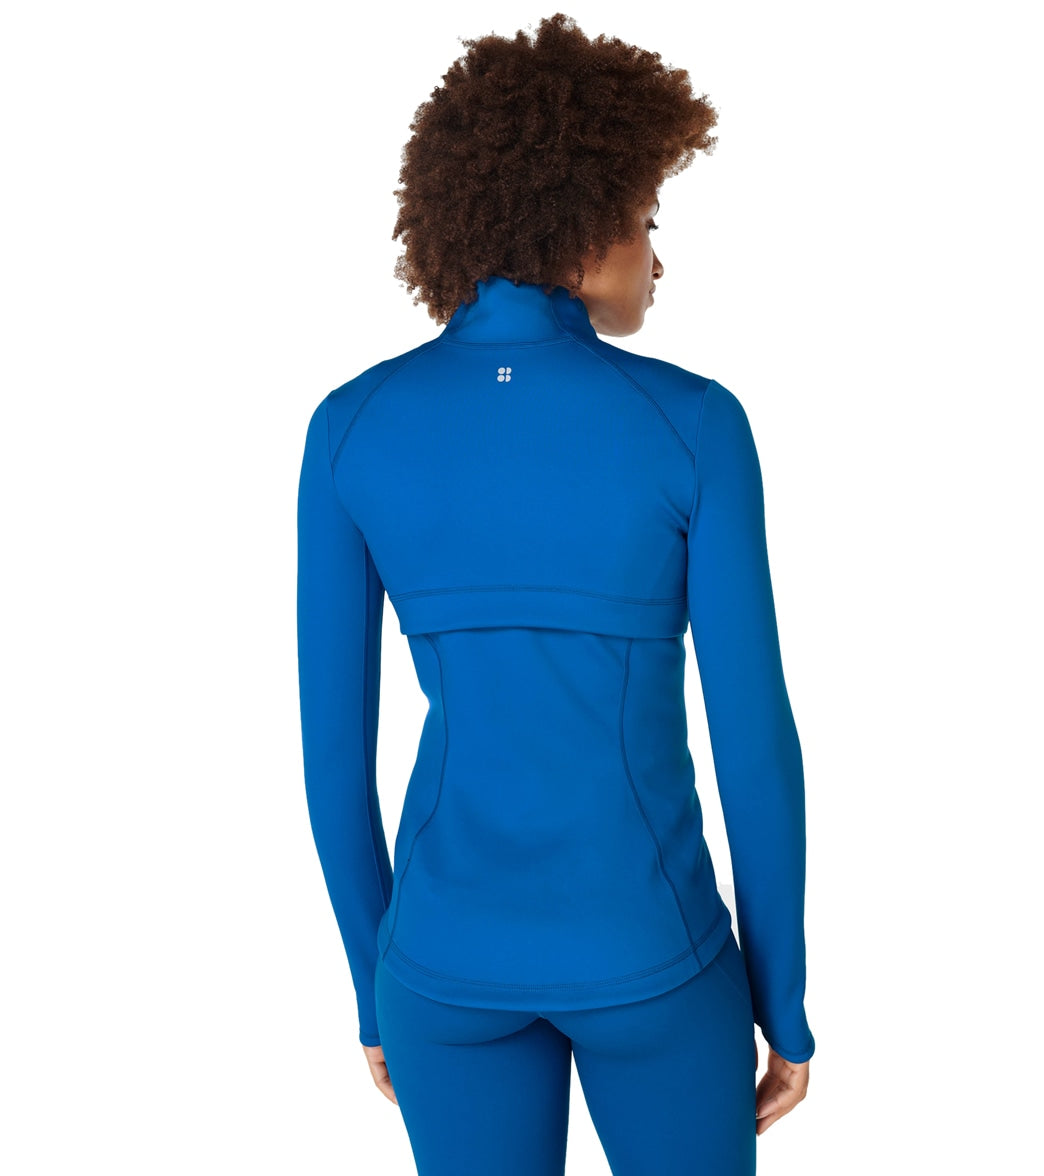 Sweaty Betty Power Boost Workout Zip Up at YogaOutlet.com - Free